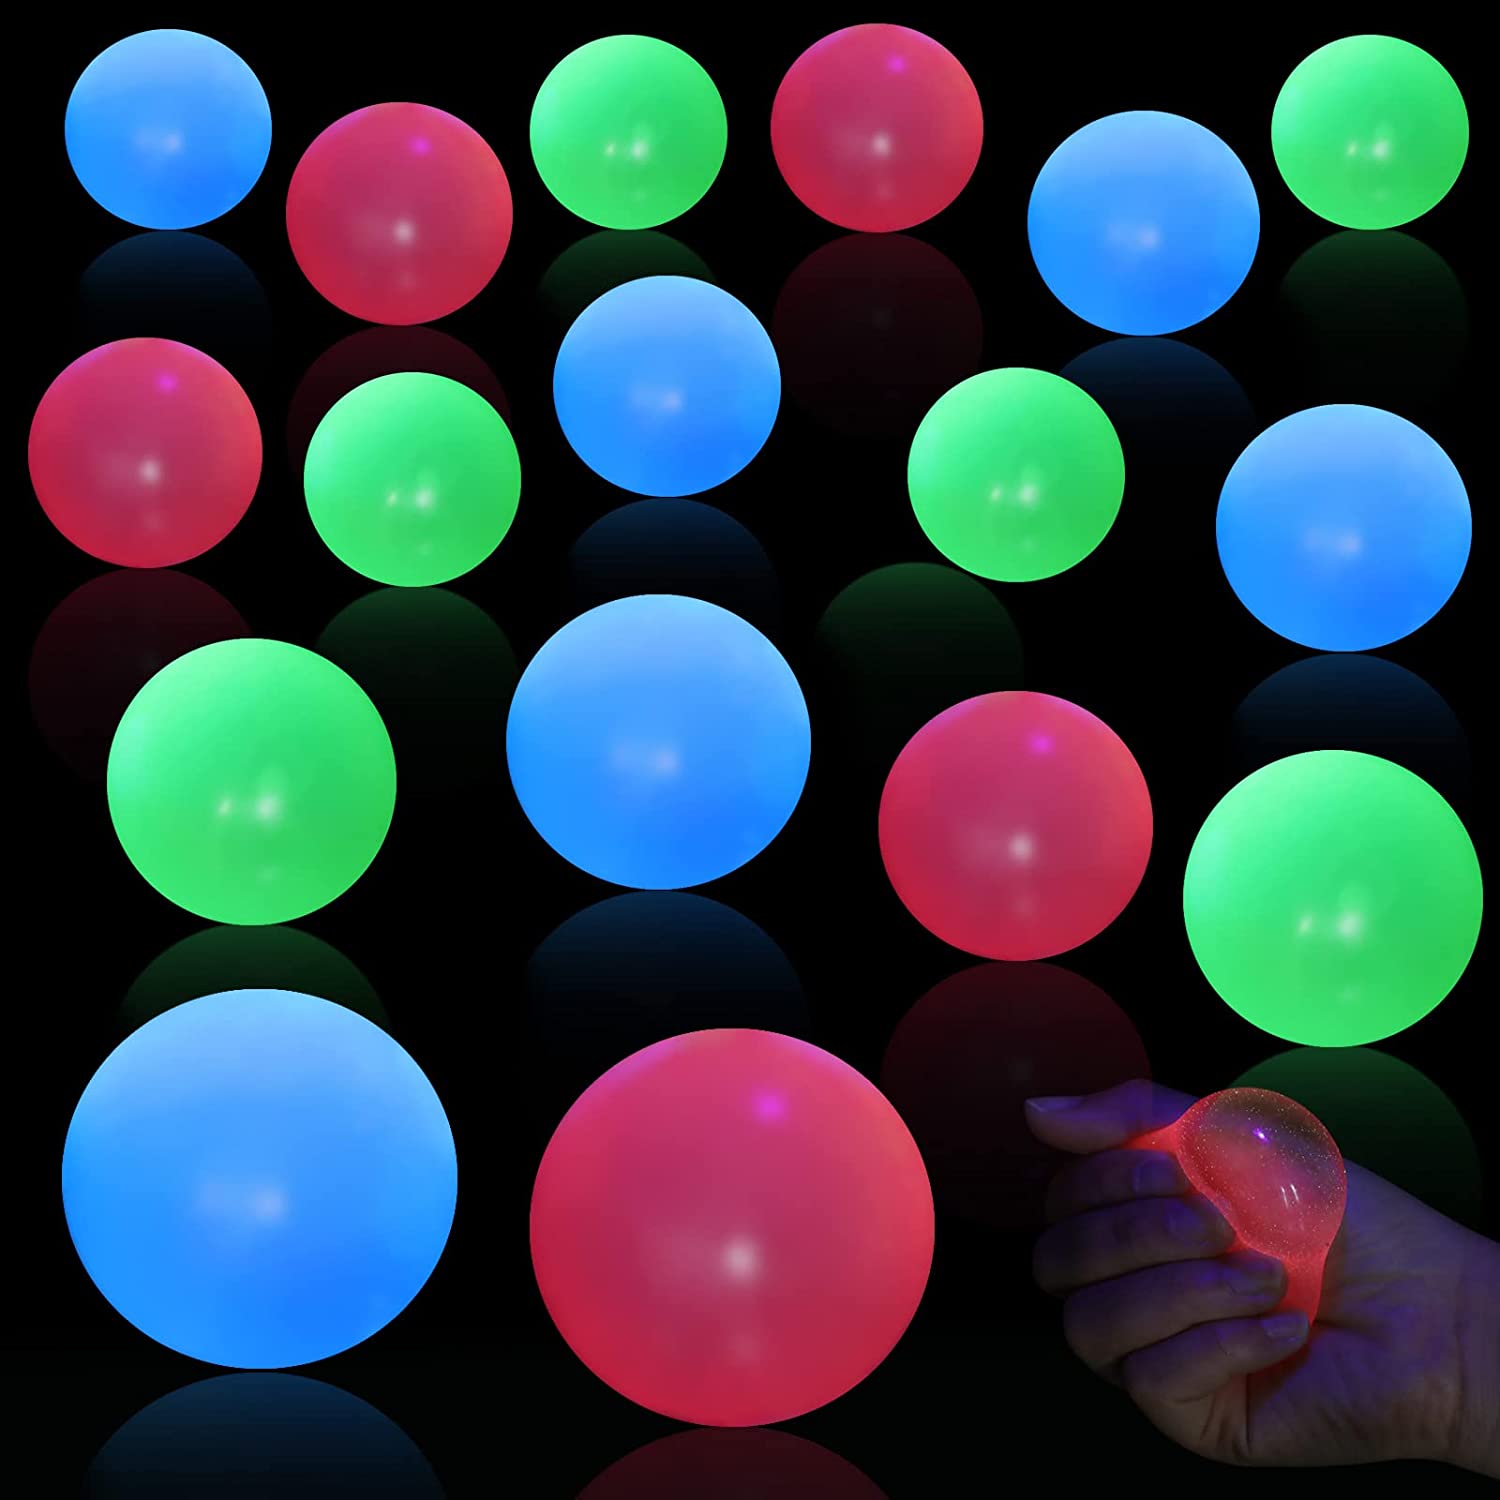 Buy Sticky Stress Balls Glow in The Dark Ceiling Balls Glowing Ball Stress Relief Toys to Help Anxiety for Adults and Kids, 4 Colors Online in Turkey. B09J8PZ1G8